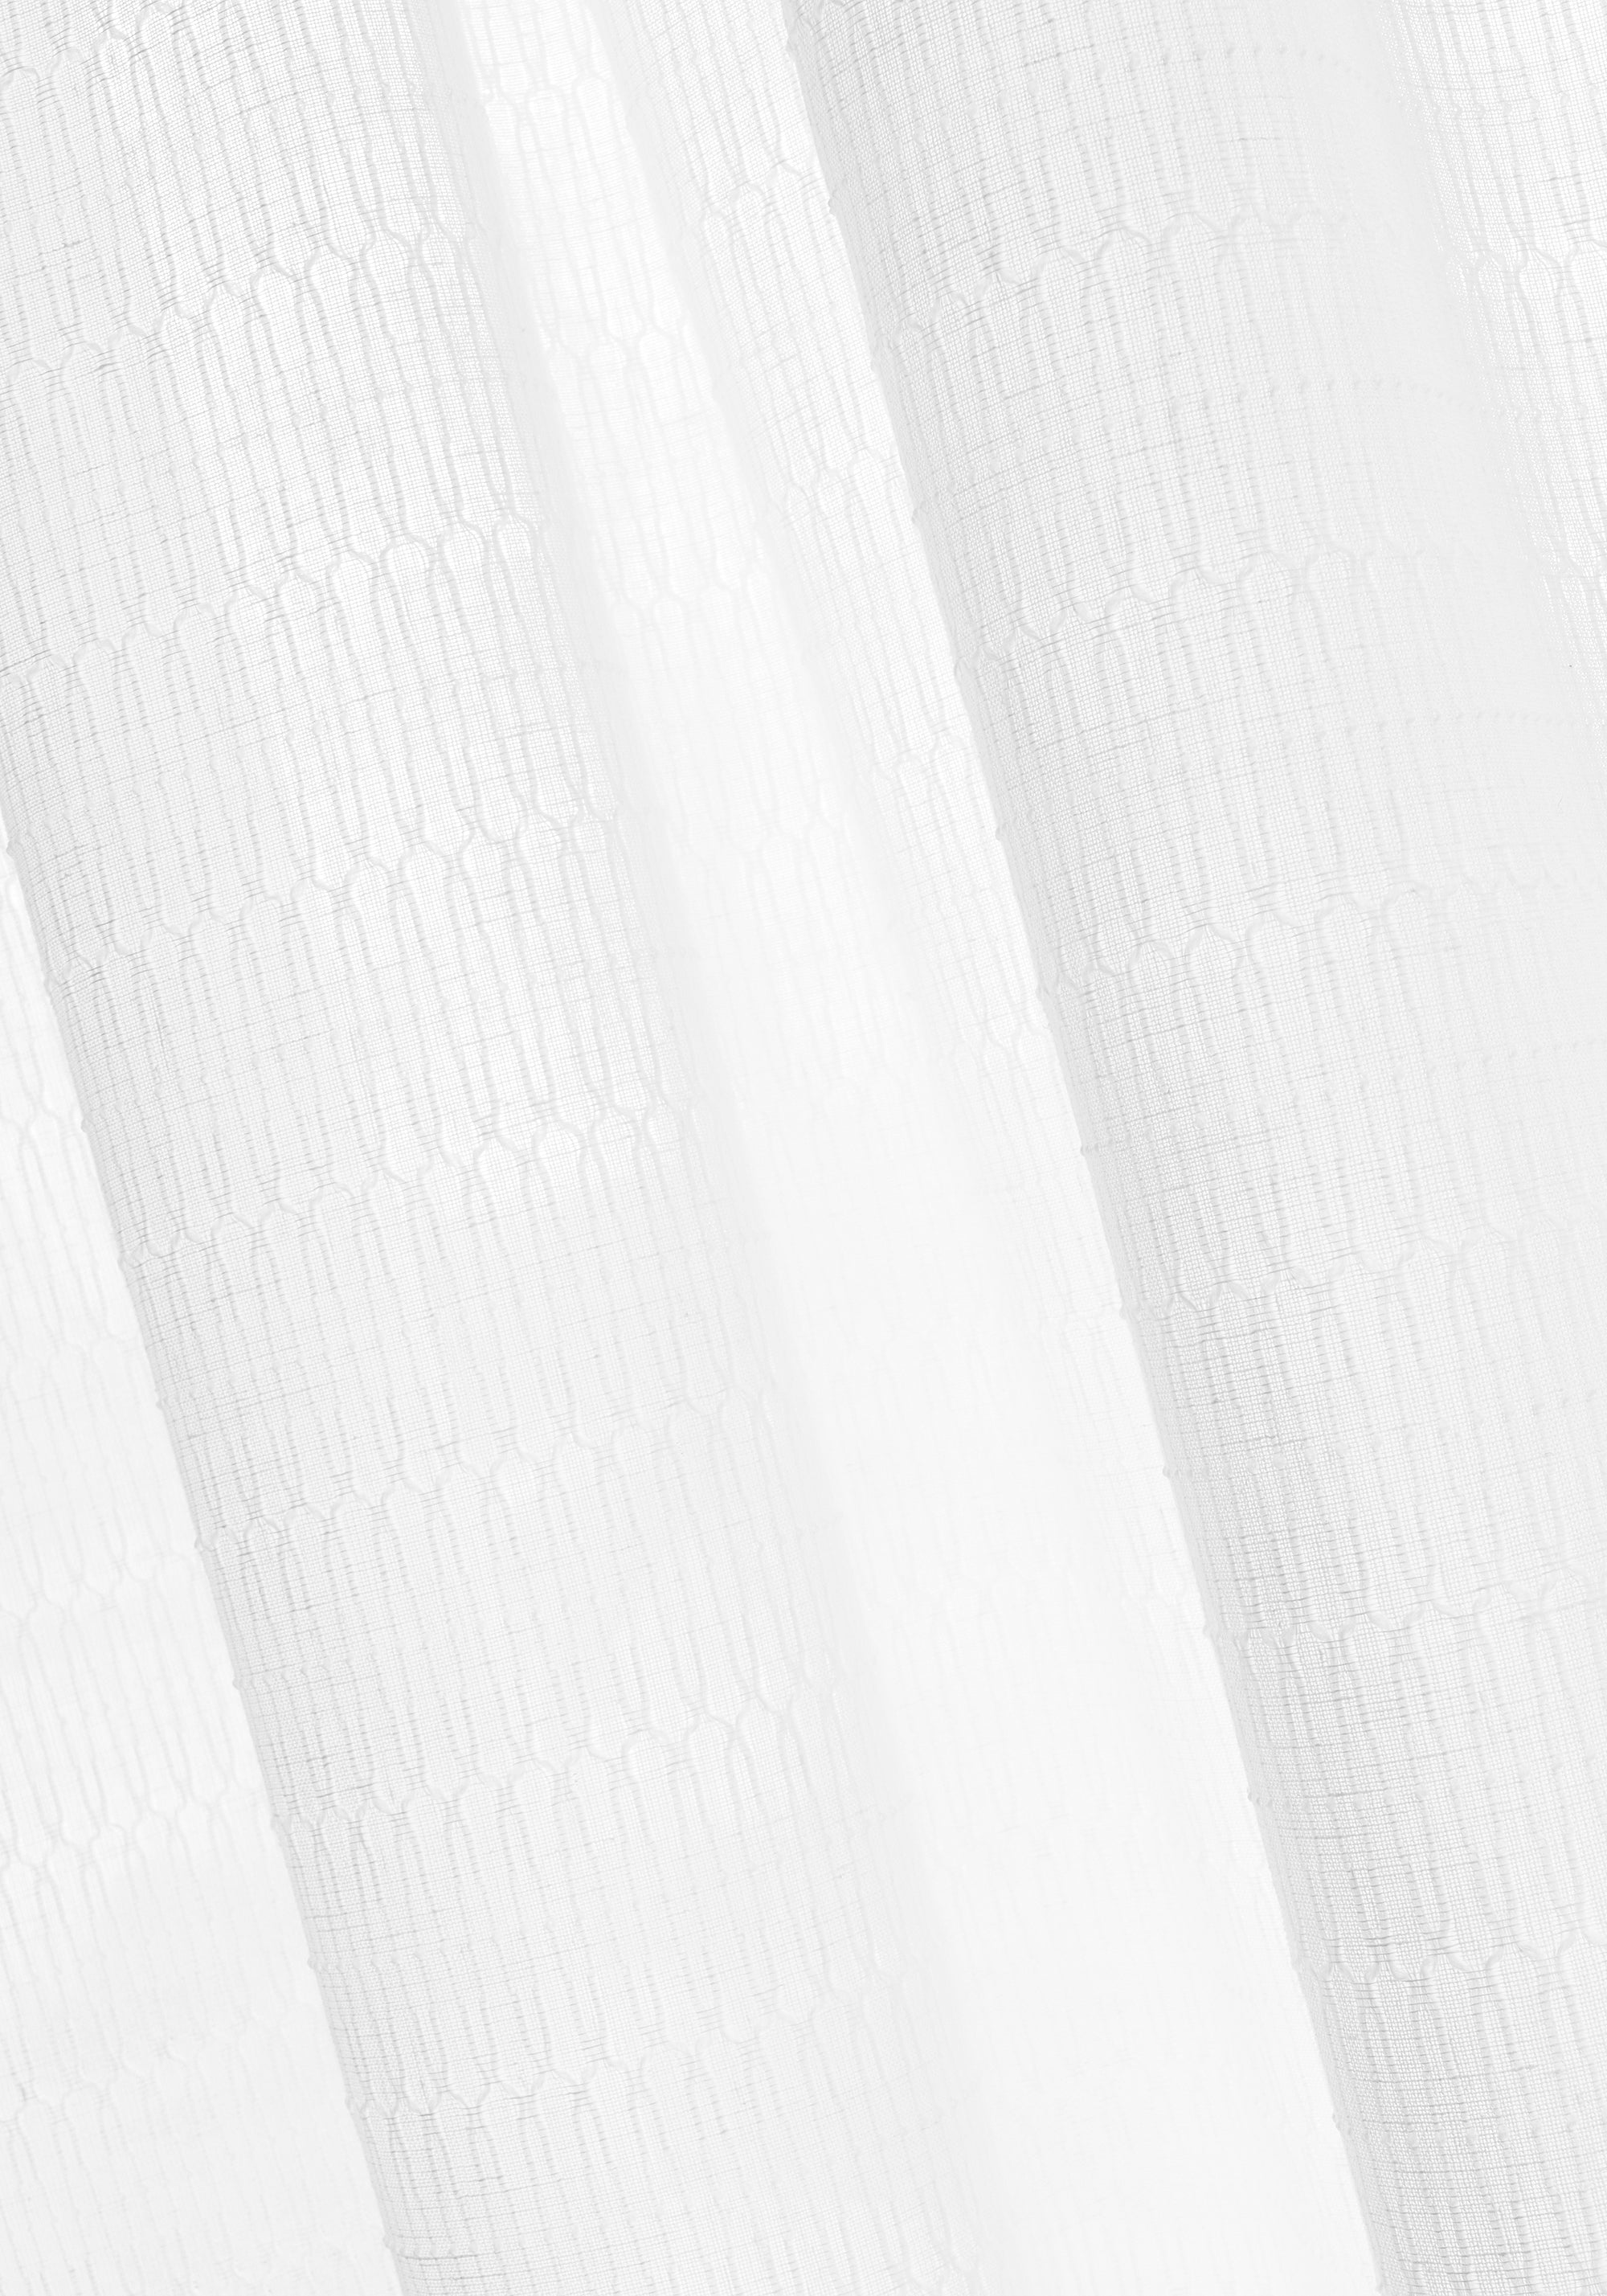 Thibaut Victoria Sheer fabric in snow white color - pattern number FWW7109 - in the Atmosphere collection